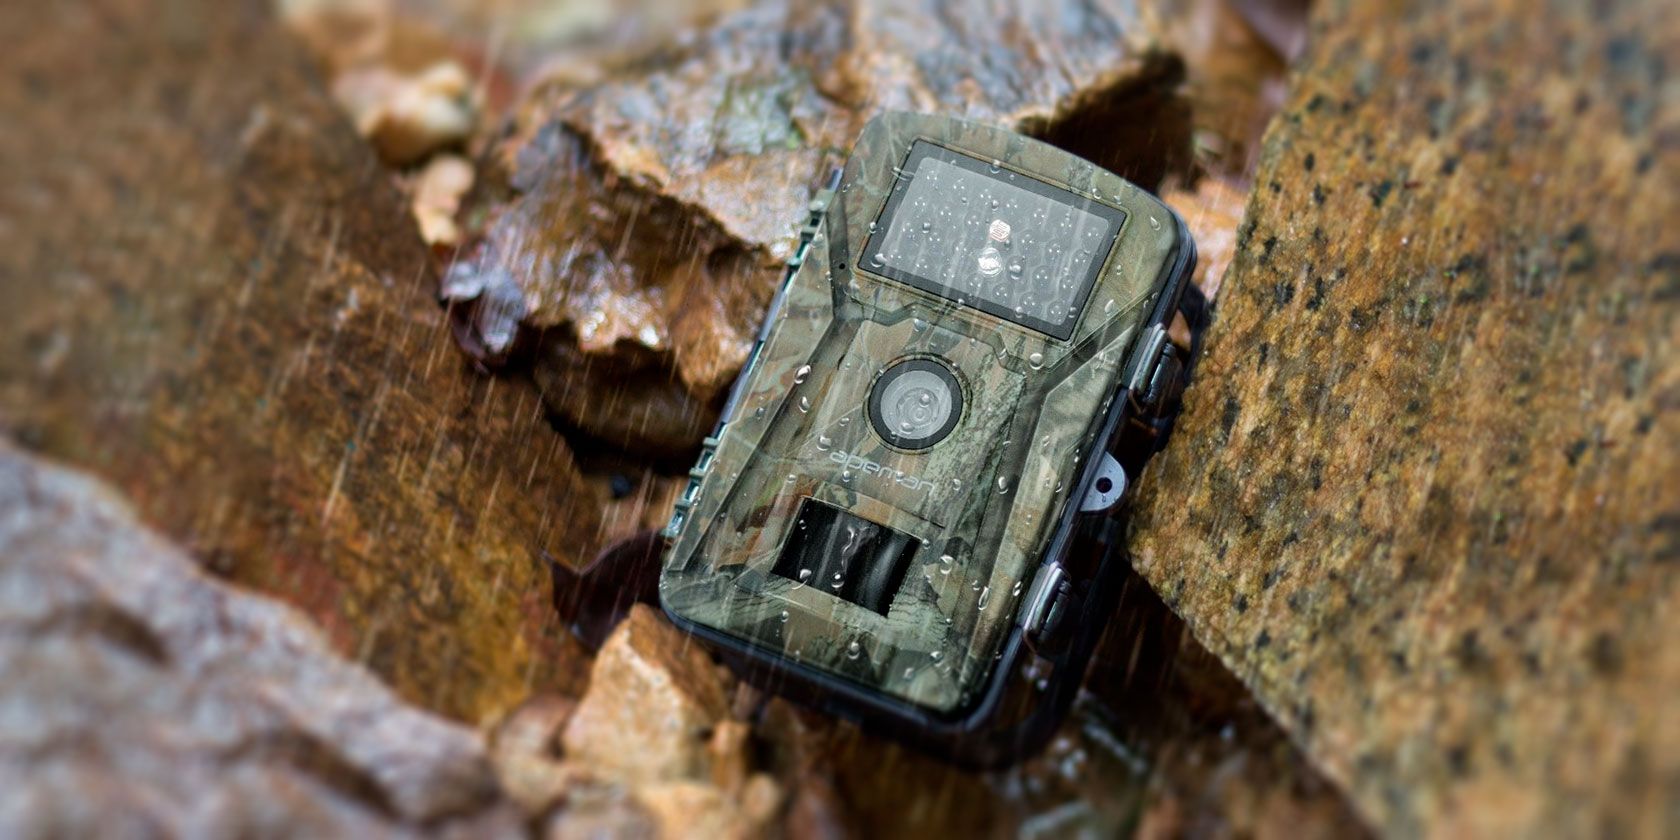 The 5 Best Trail Cameras for All Budgets